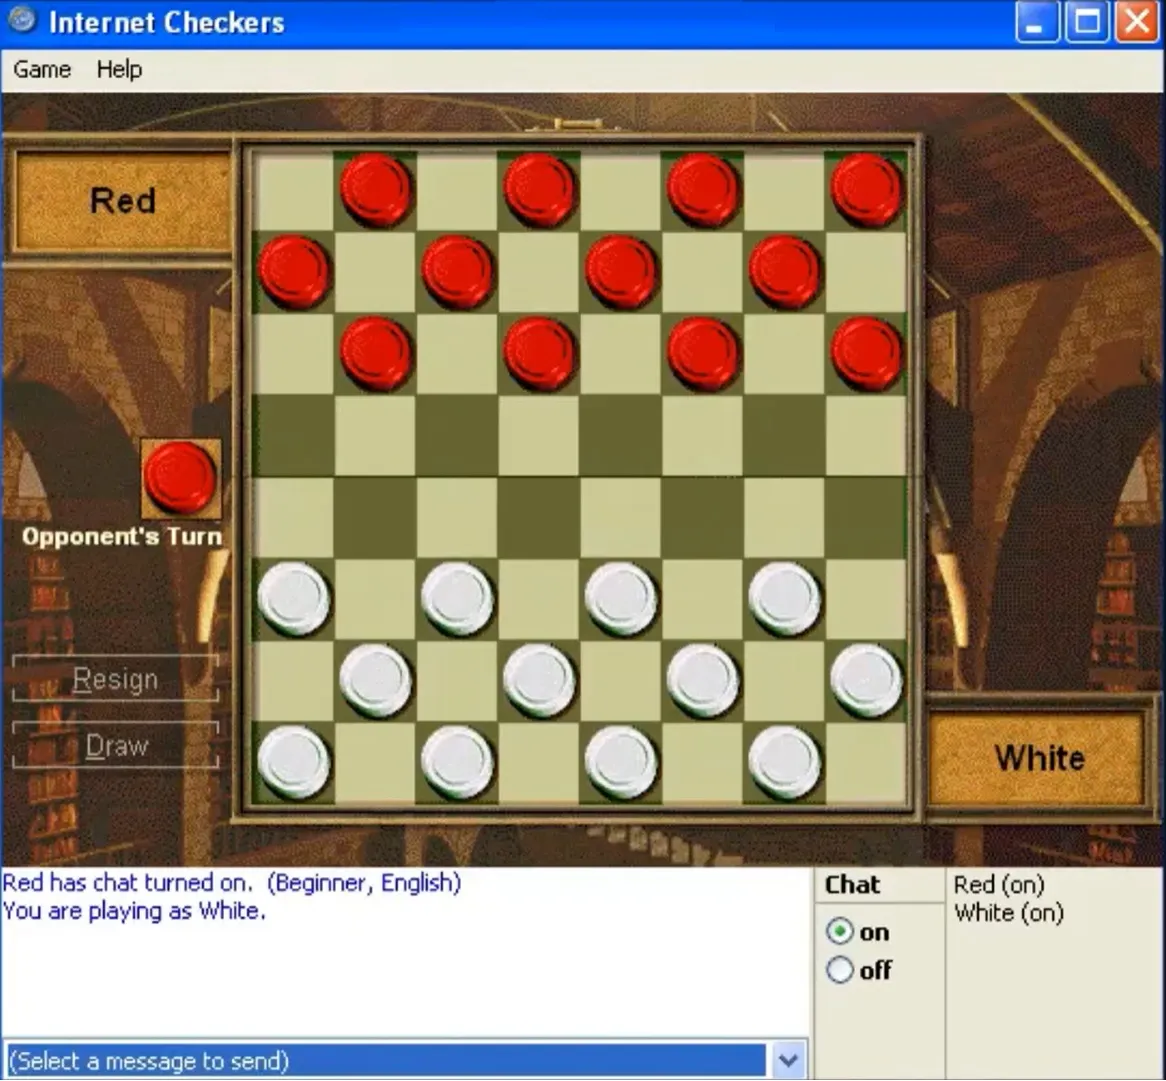 Internet Checkers PC Game